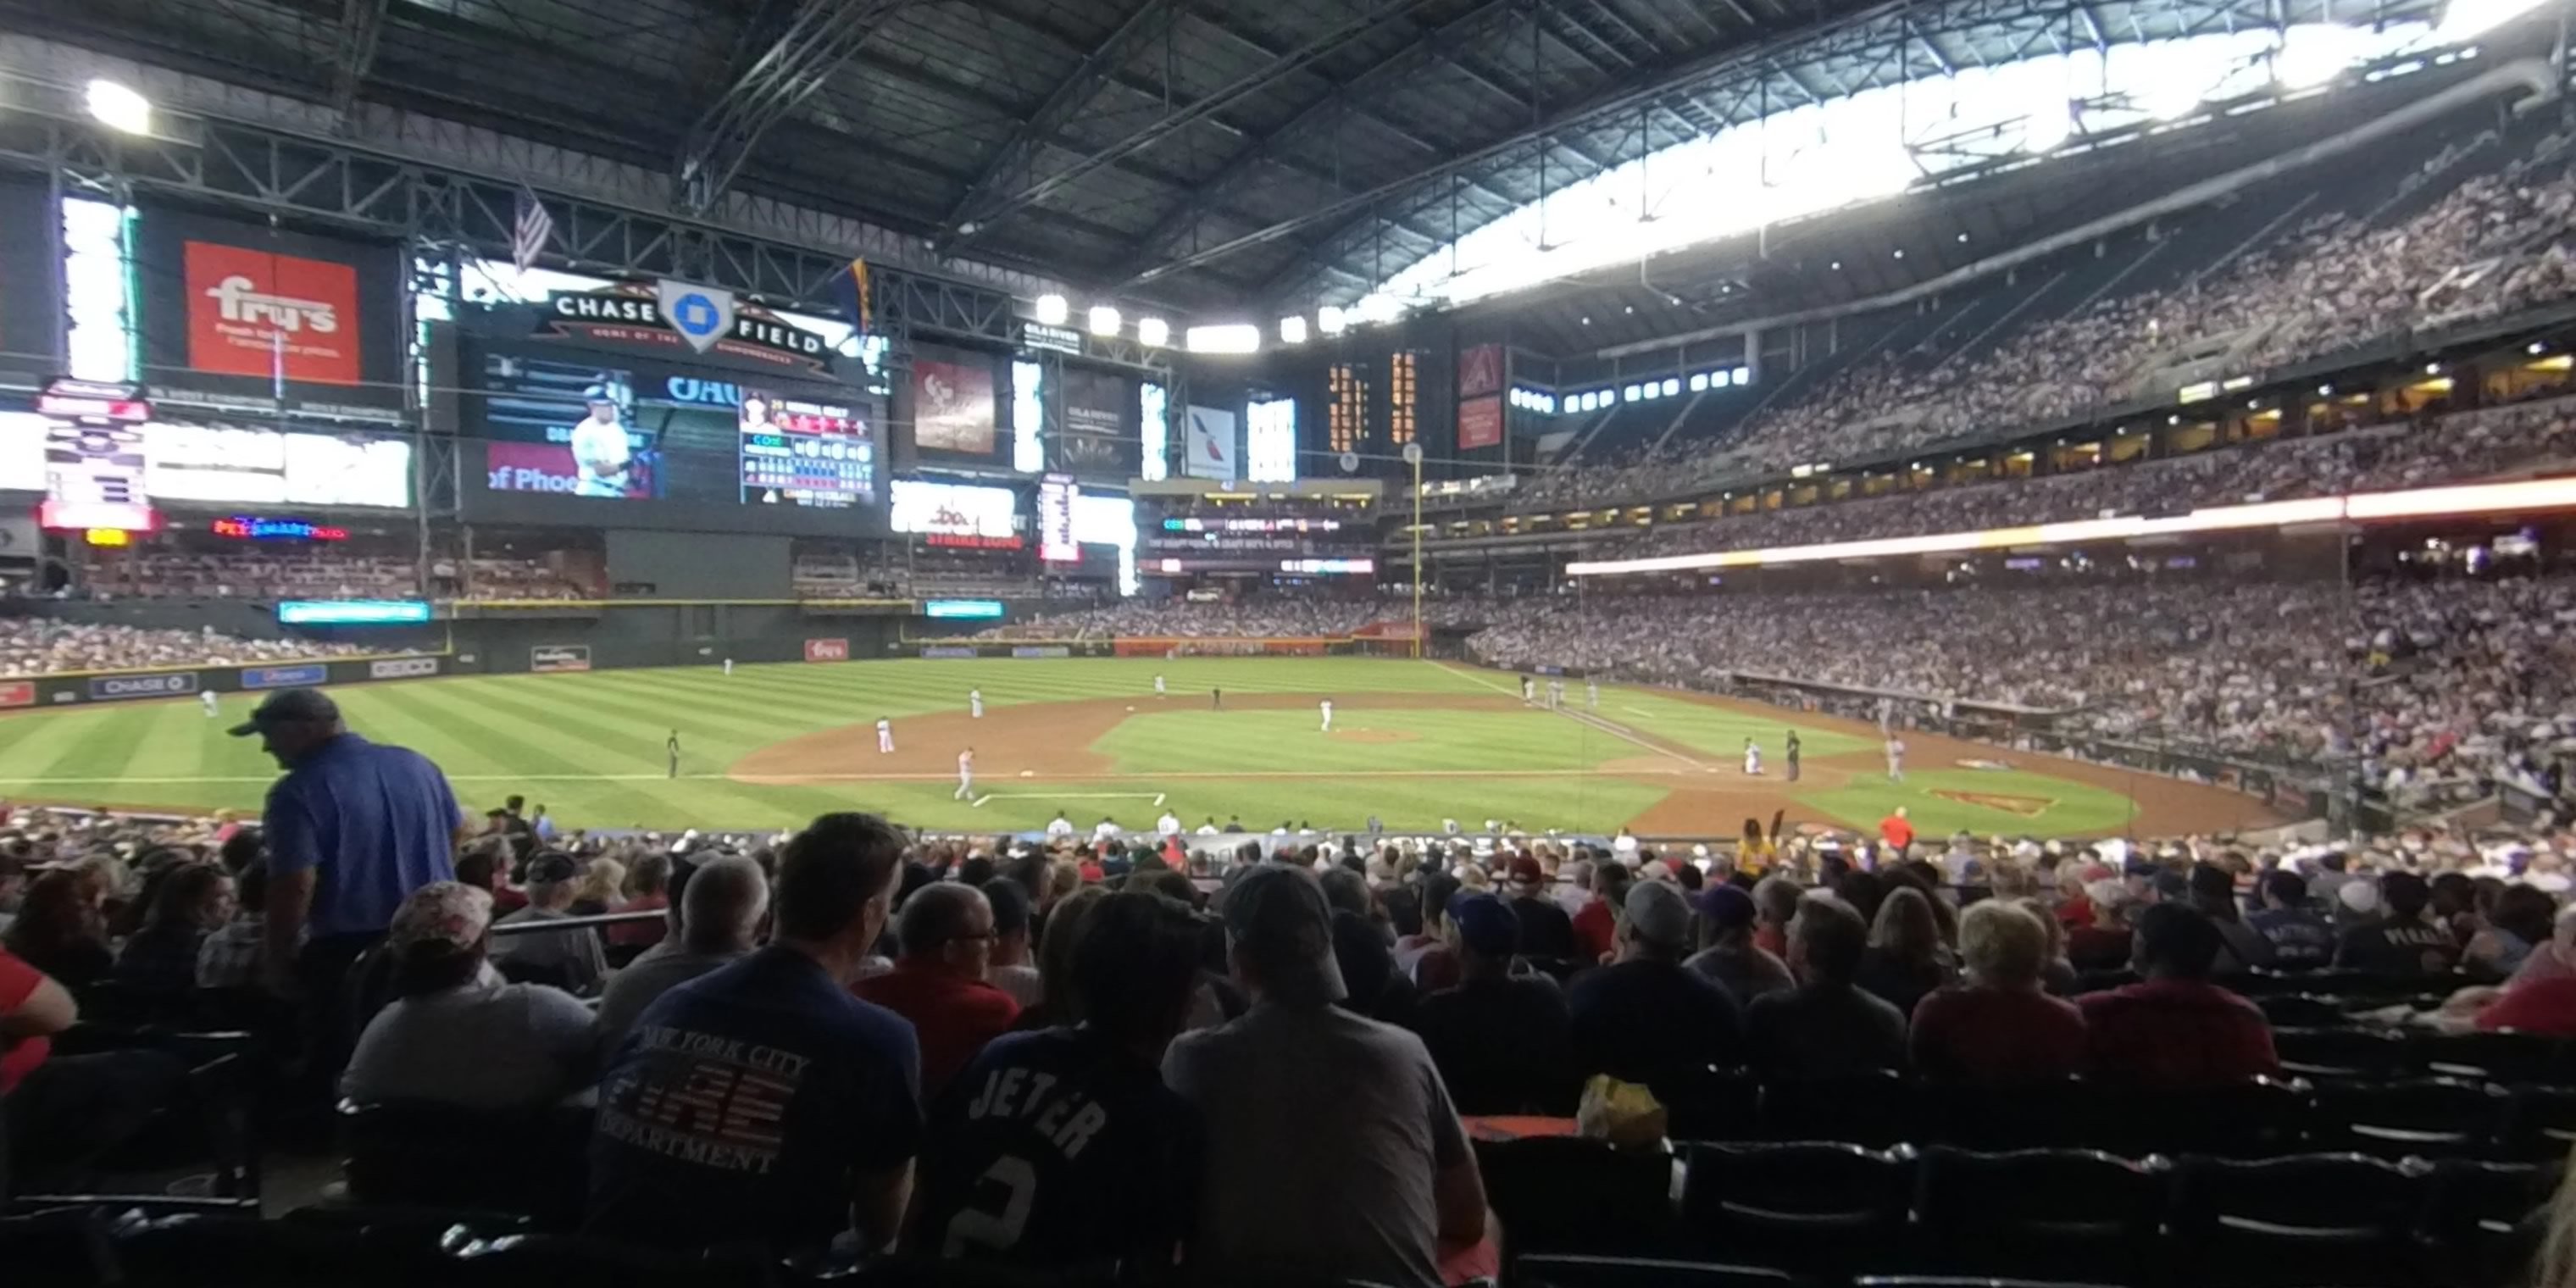 section 127 panoramic seat view  for baseball - chase field